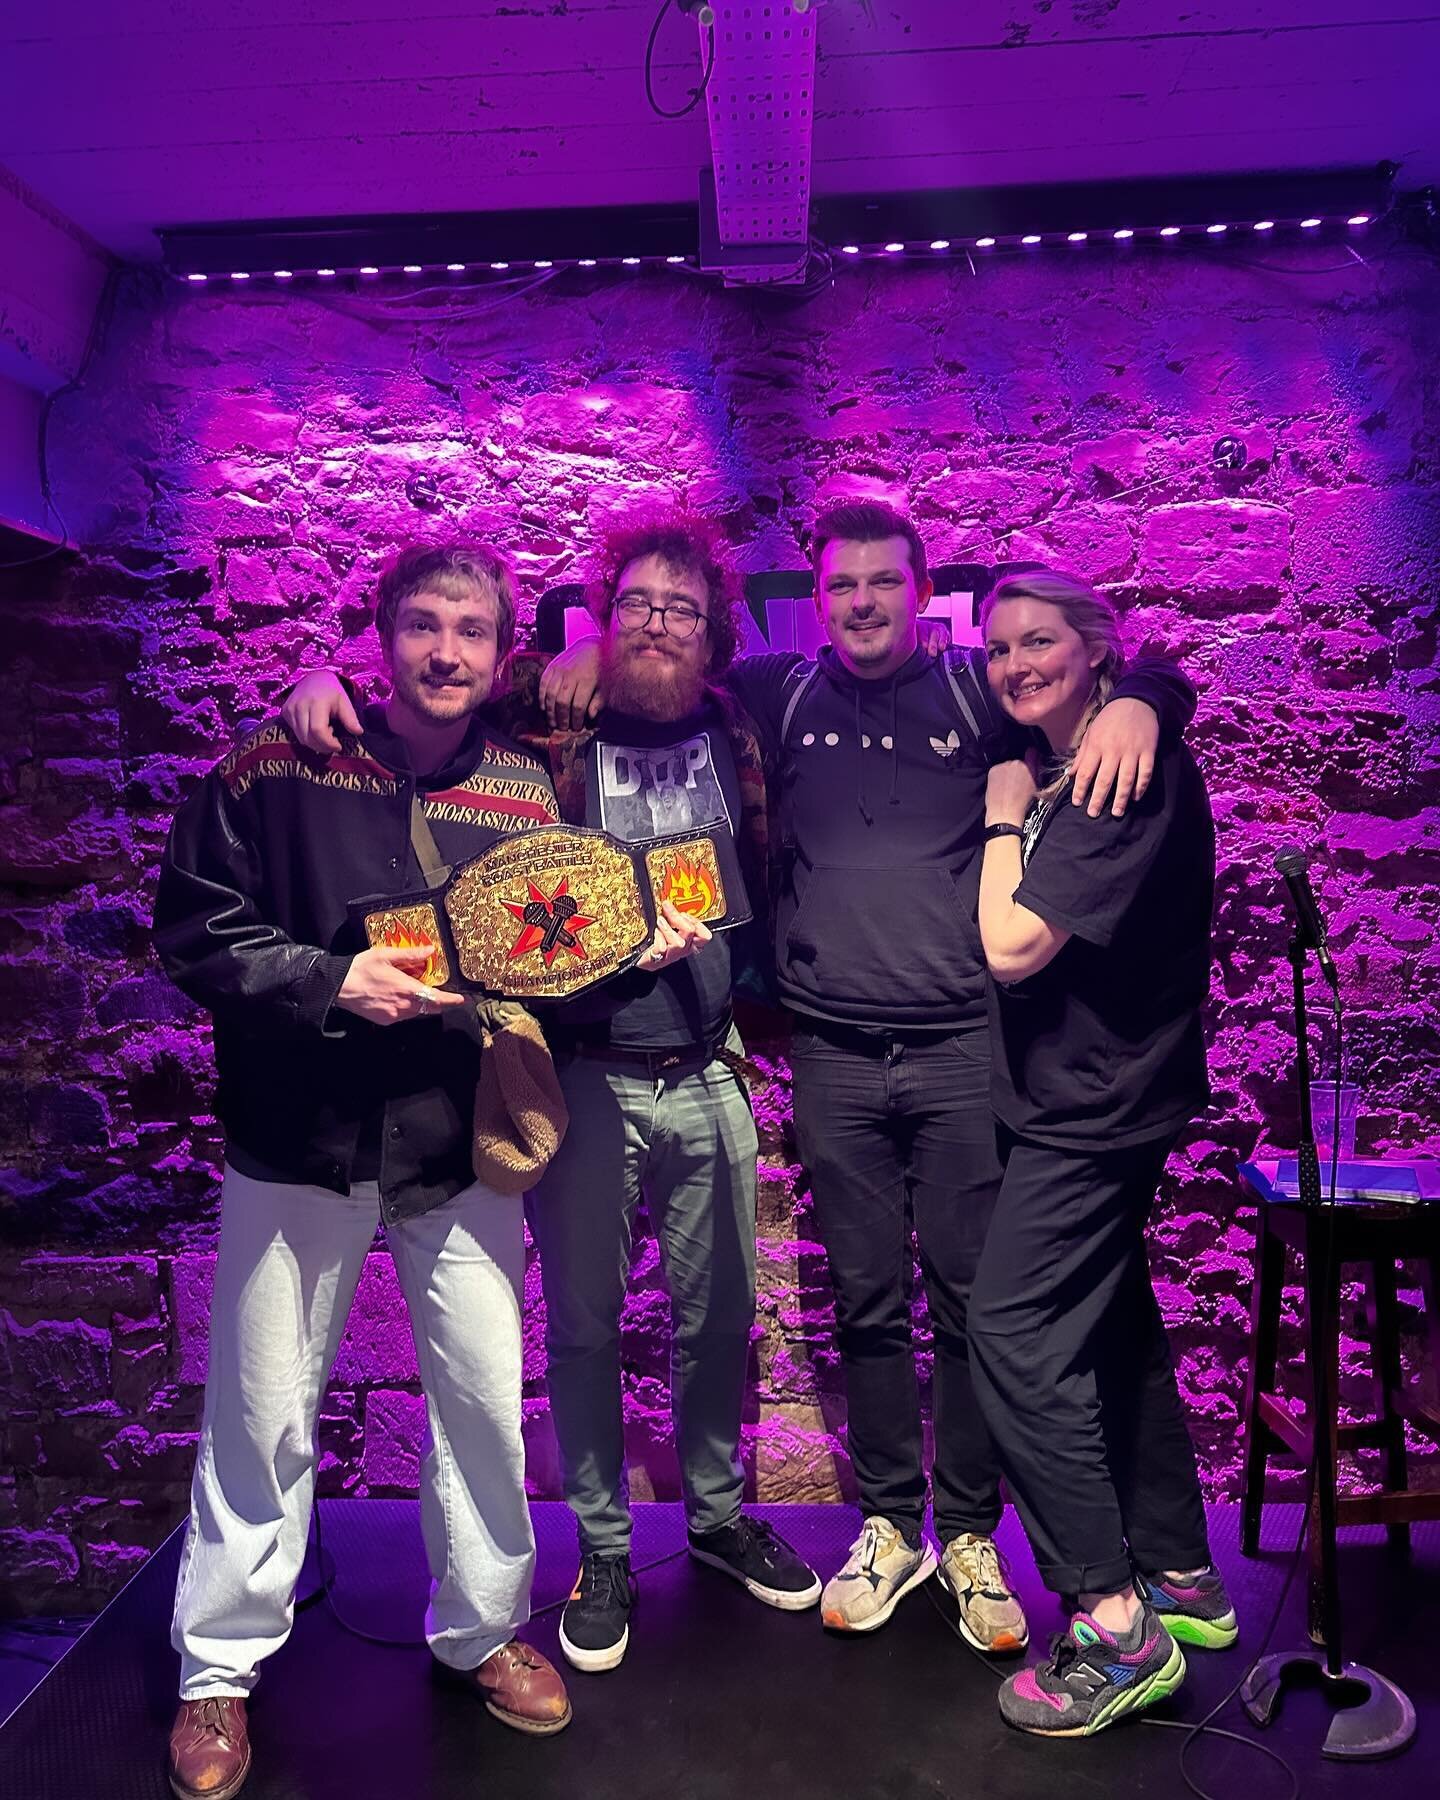 What a bloody great night! We had just 3 days to write our roasts for @roastbattlescotland at @monkey.barrel.comedy and we loved it! Great experience to be in Edinburgh and see what @ryancullencomedy has put together for Roast Battle Scotland. 🙌🏽🔥